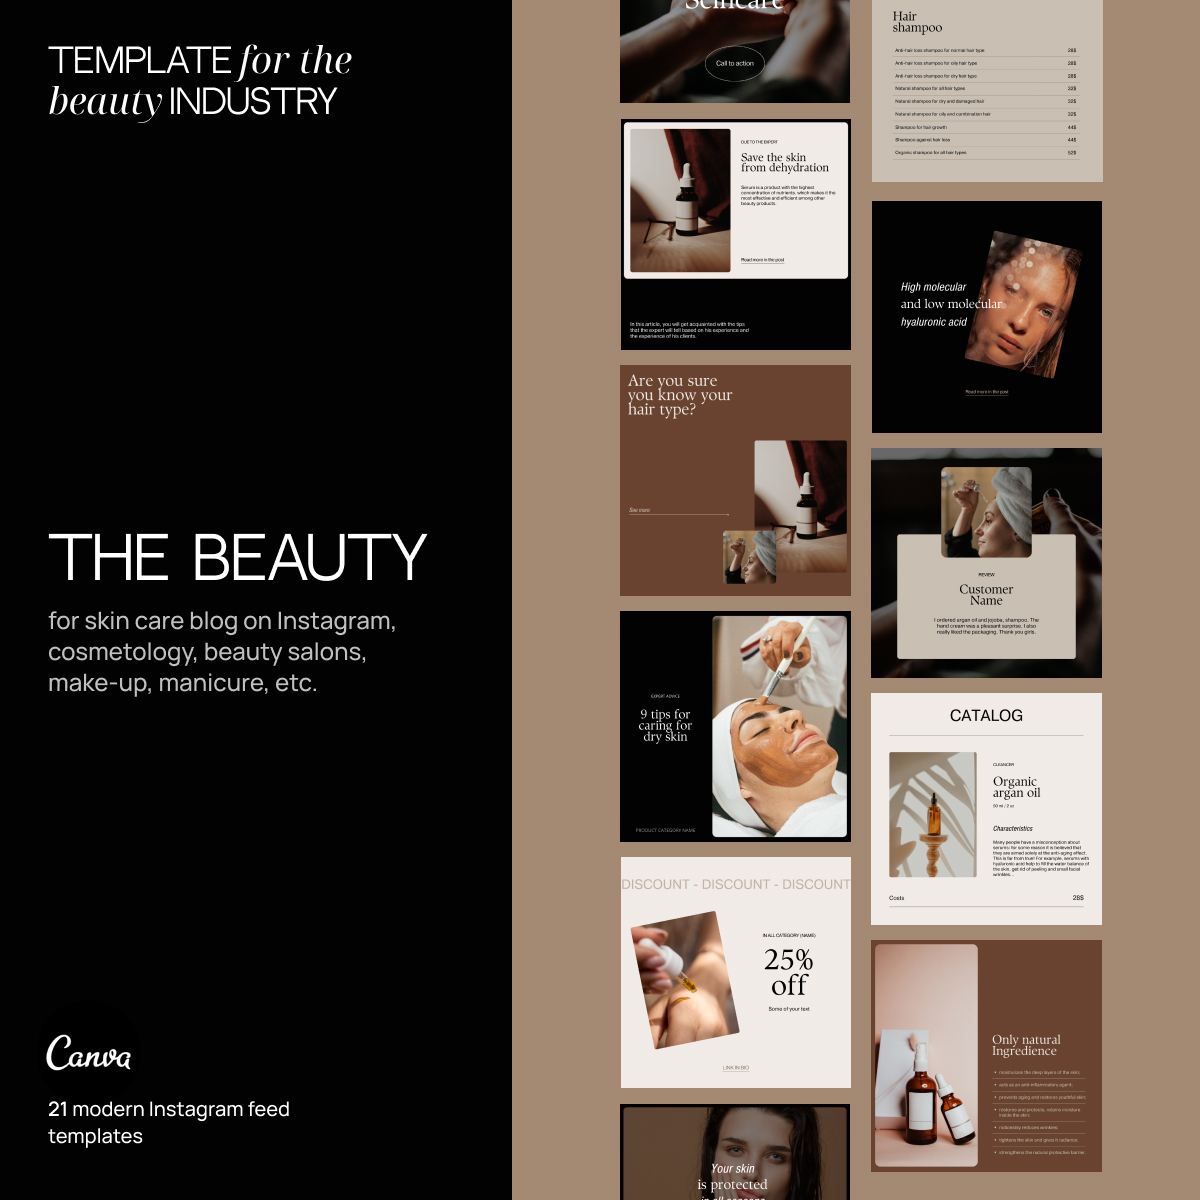 Modern Instagram Feed Templates for the Beauty Industry main cover.